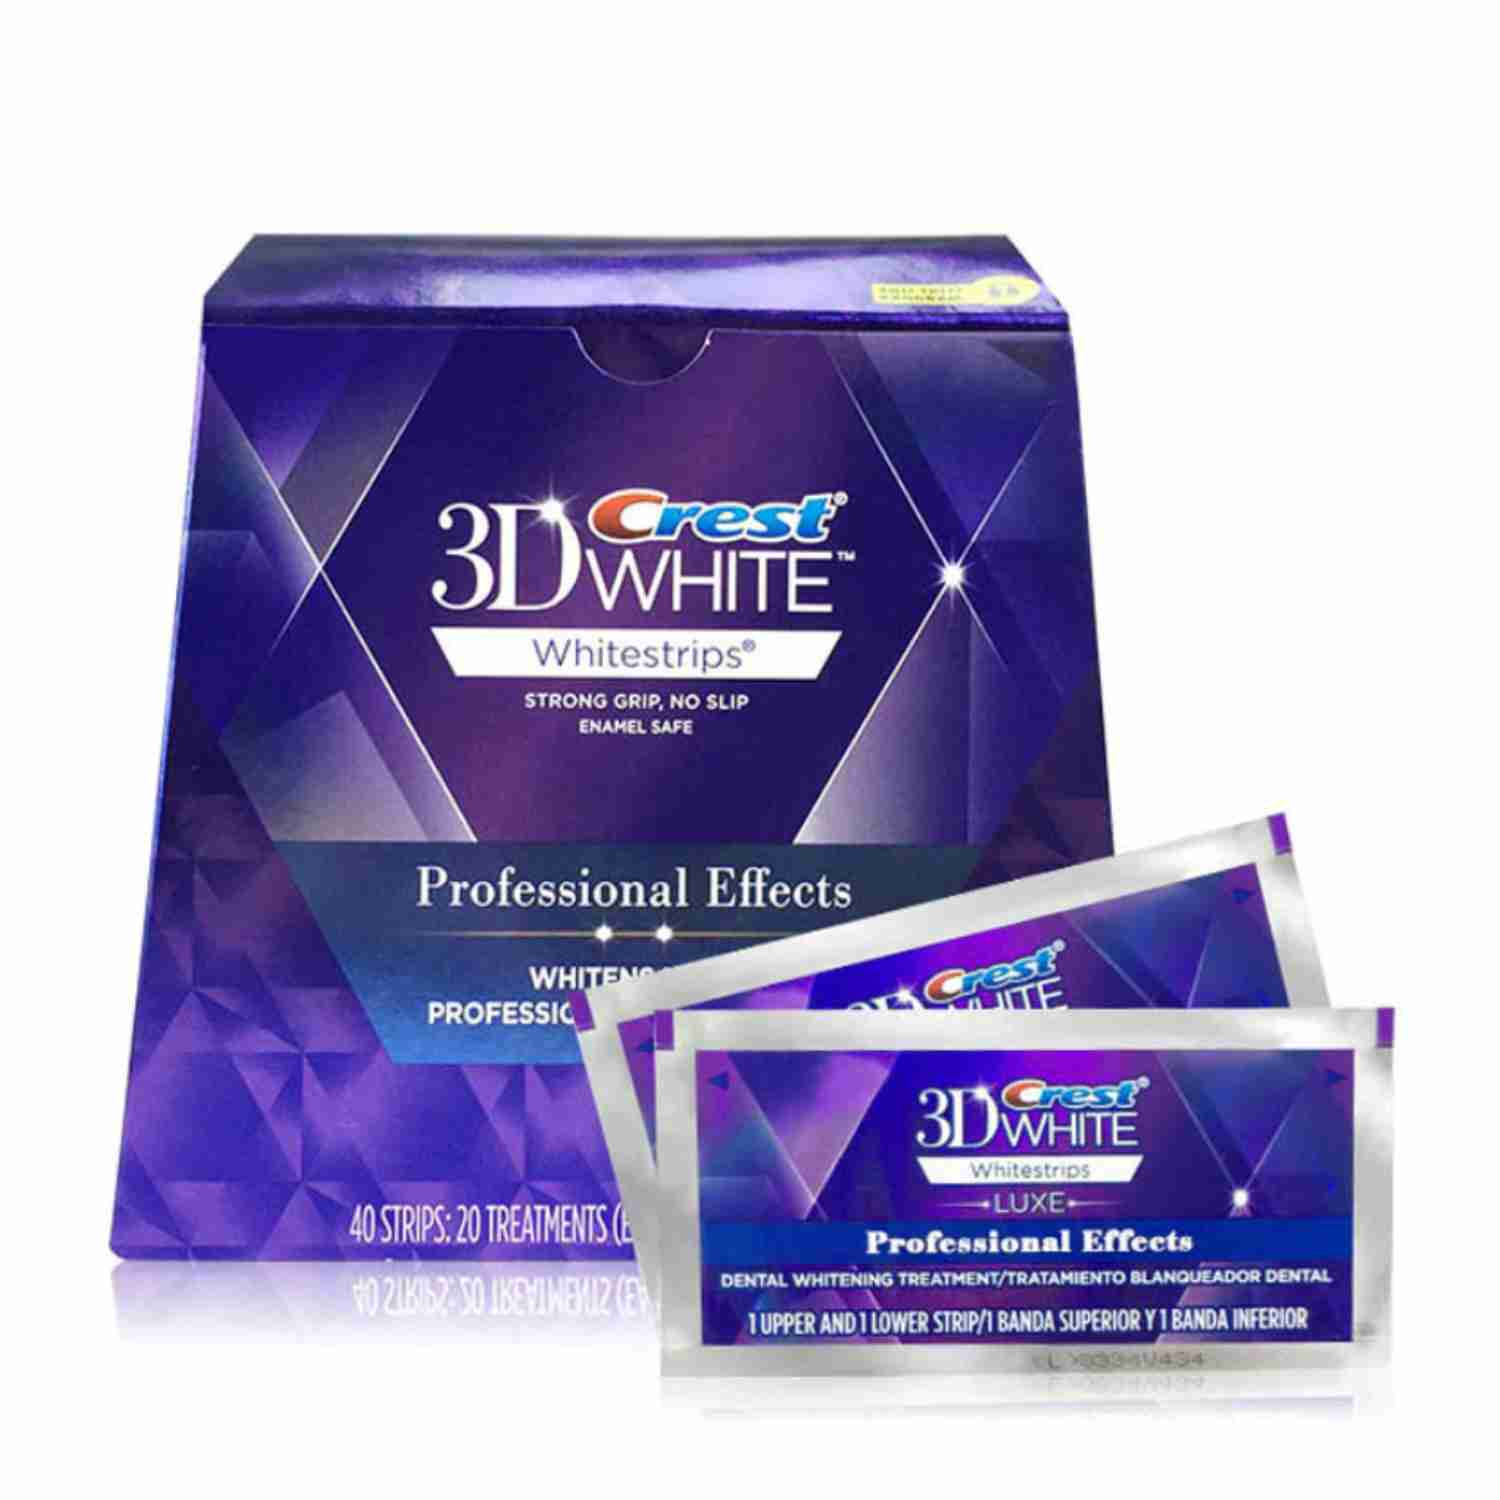 Best Crest 3D White Professional Effects Whitestrips Price & Reviews in ...